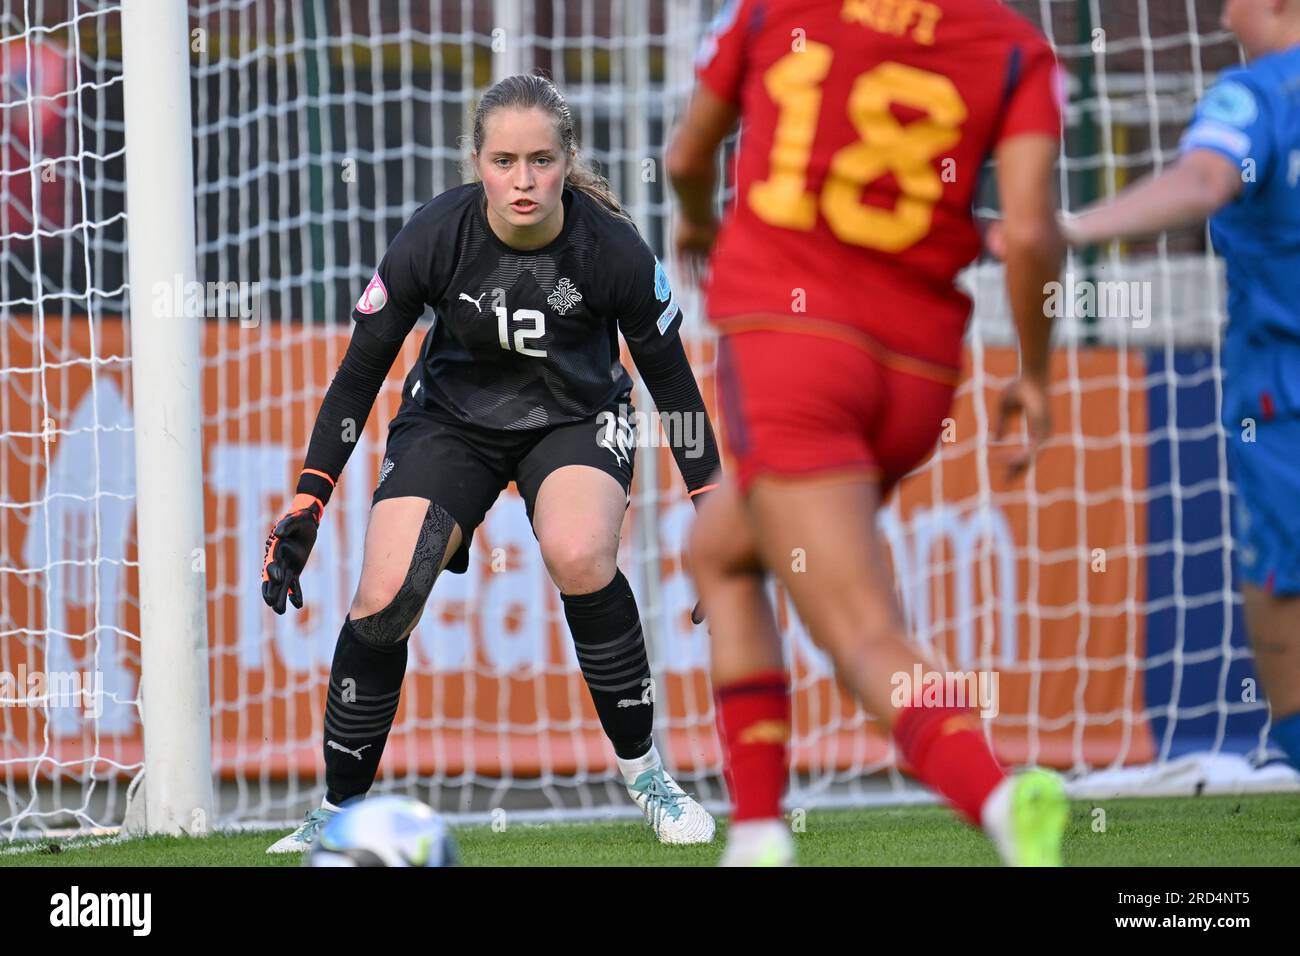 Tubize, Belgium. 18th July, 2023. goalkeeper Fanney Inga Birkisdottir (12) of Iceland pictured in action during a female soccer game between the national women under 19 teams of Iceland and Spain at the UEFA Women's Under-19 EURO Final Tournament on the first matchday in Group B on Tuesday 18 July 2023 in Tubize, Belgium . Credit: sportpix/Alamy Live News Stock Photo